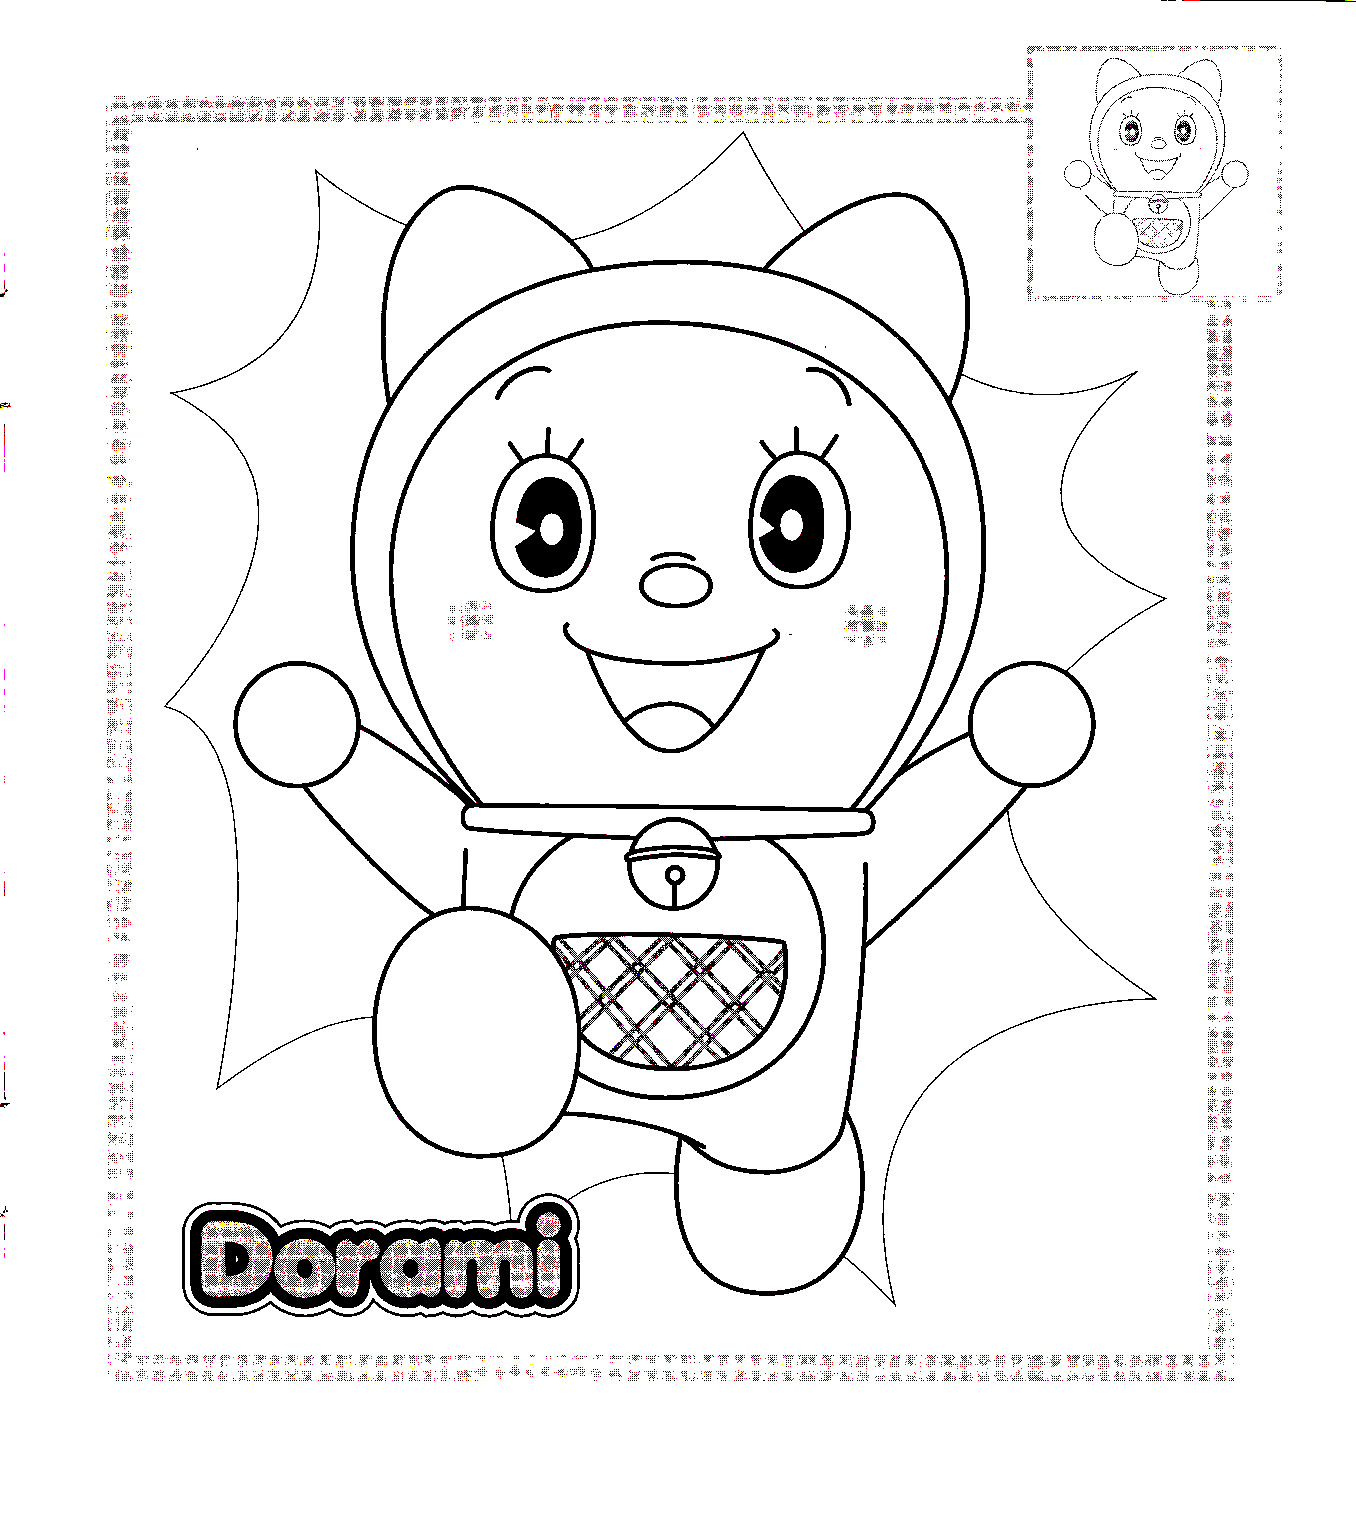 Download Doraemon Coloring Pages | Minister Coloring